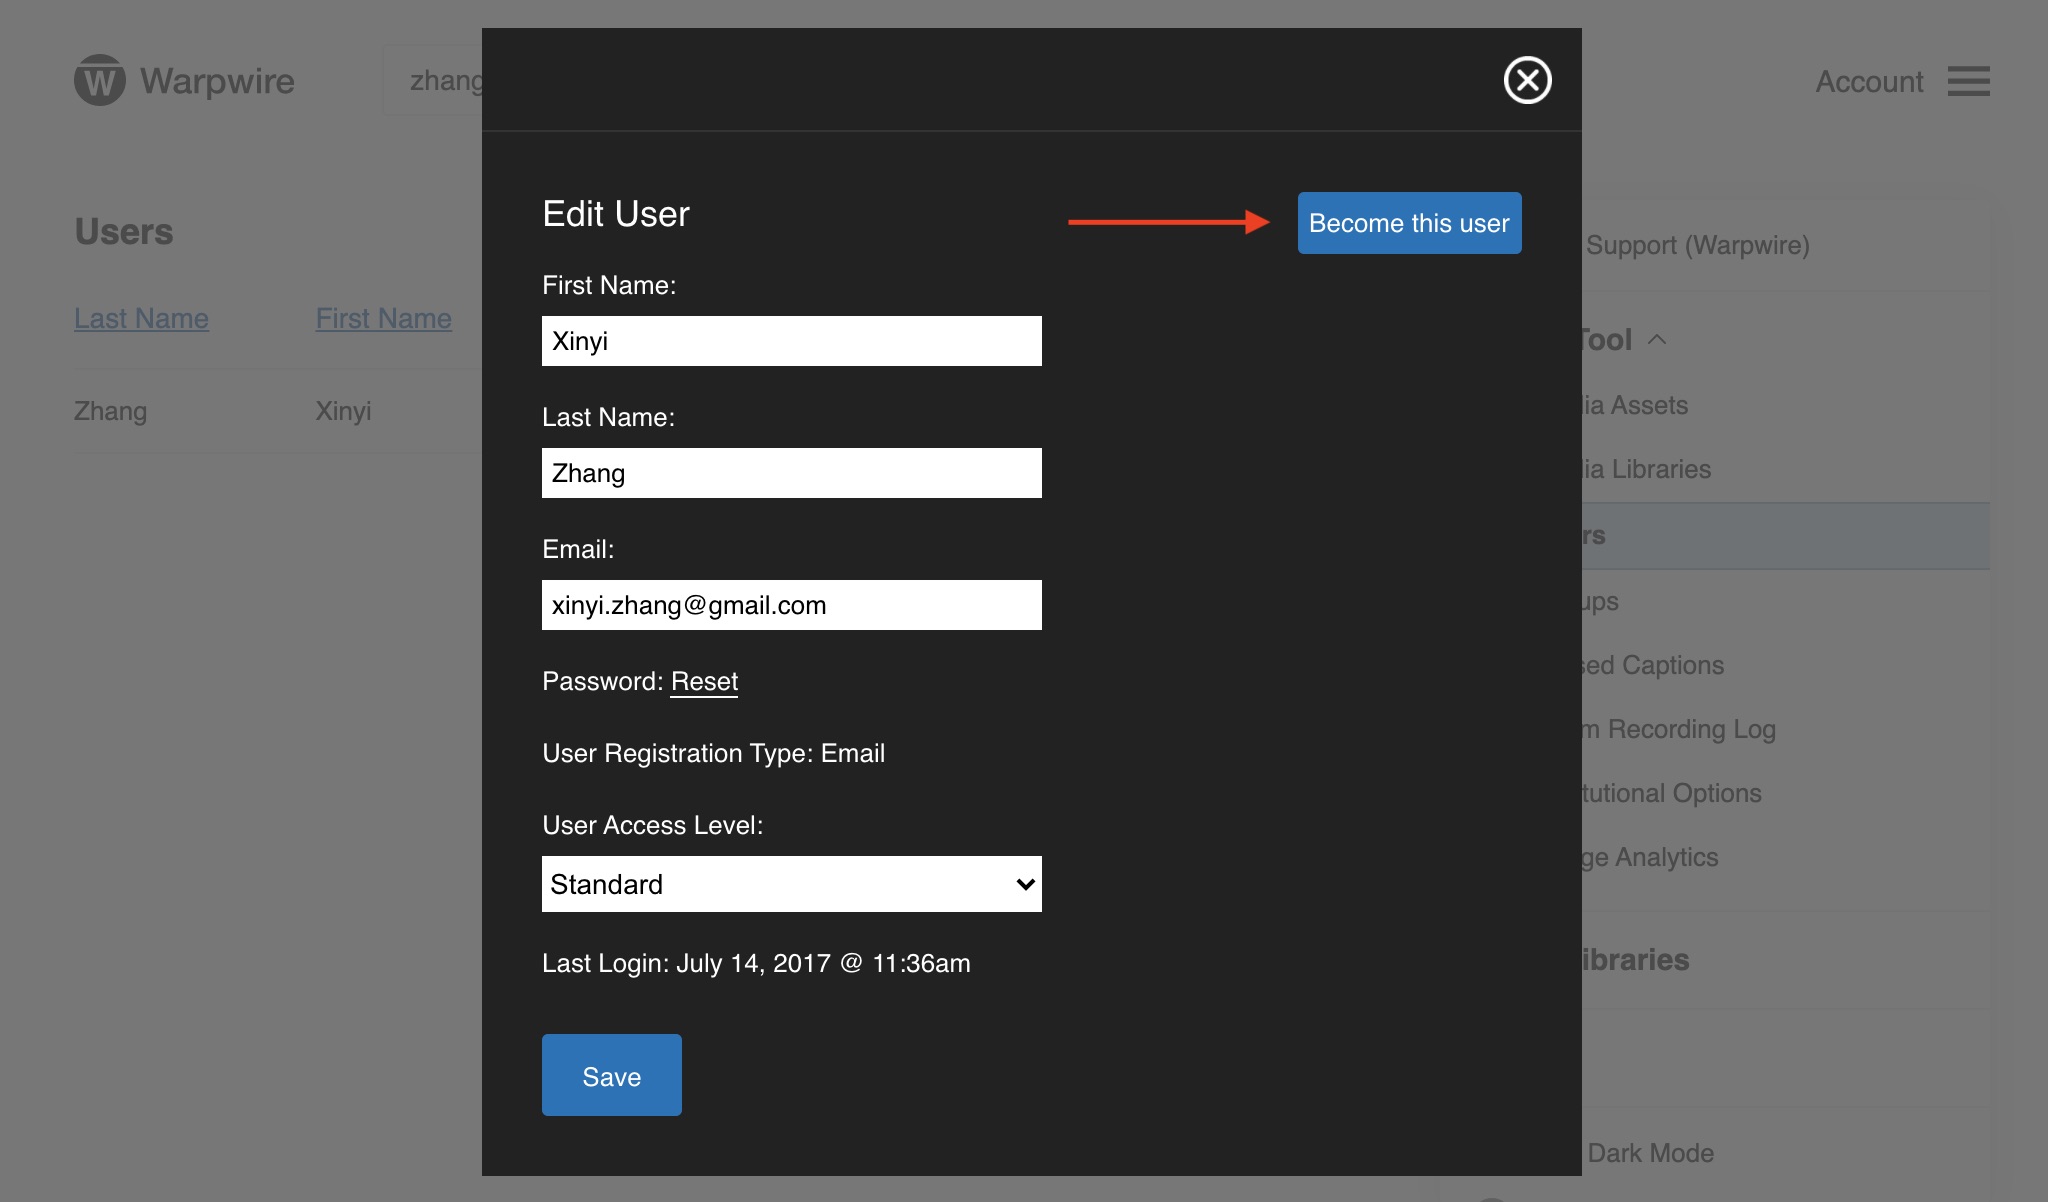 Panel showing user details and 'become this user' button within the Warpwire platform